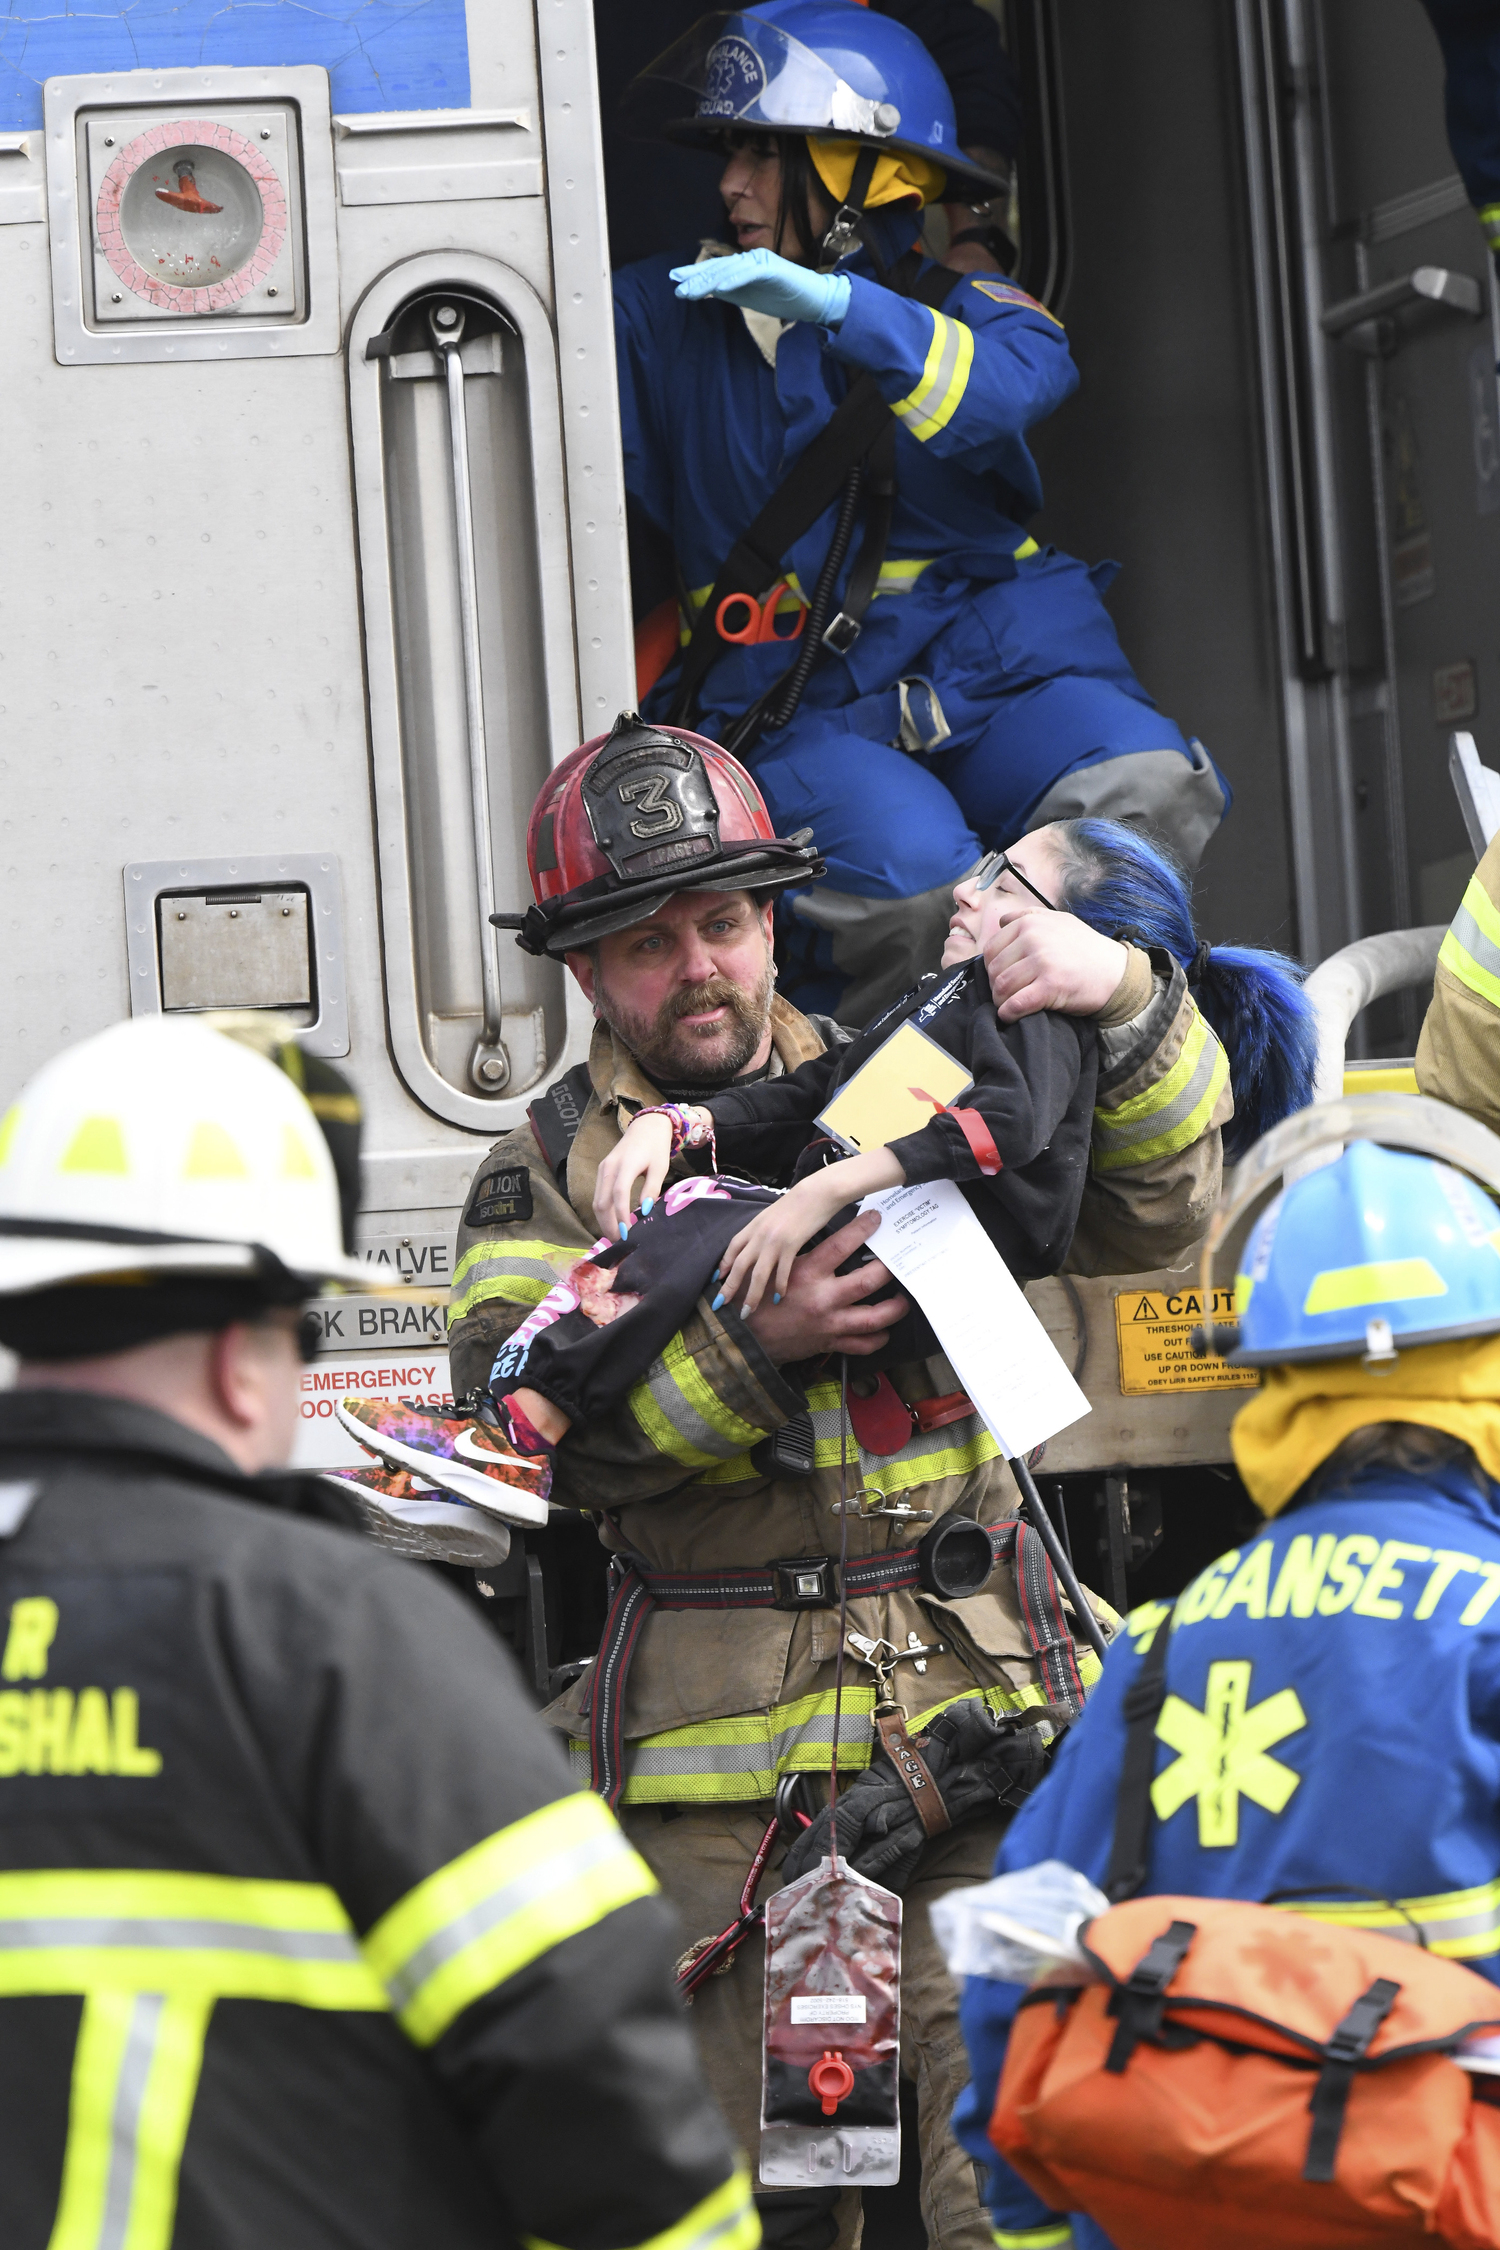 First responders go to work during the full-scale mass casualty drill involving a train accident on Sunday morning in Amagansett.  DOUG KUNTZ